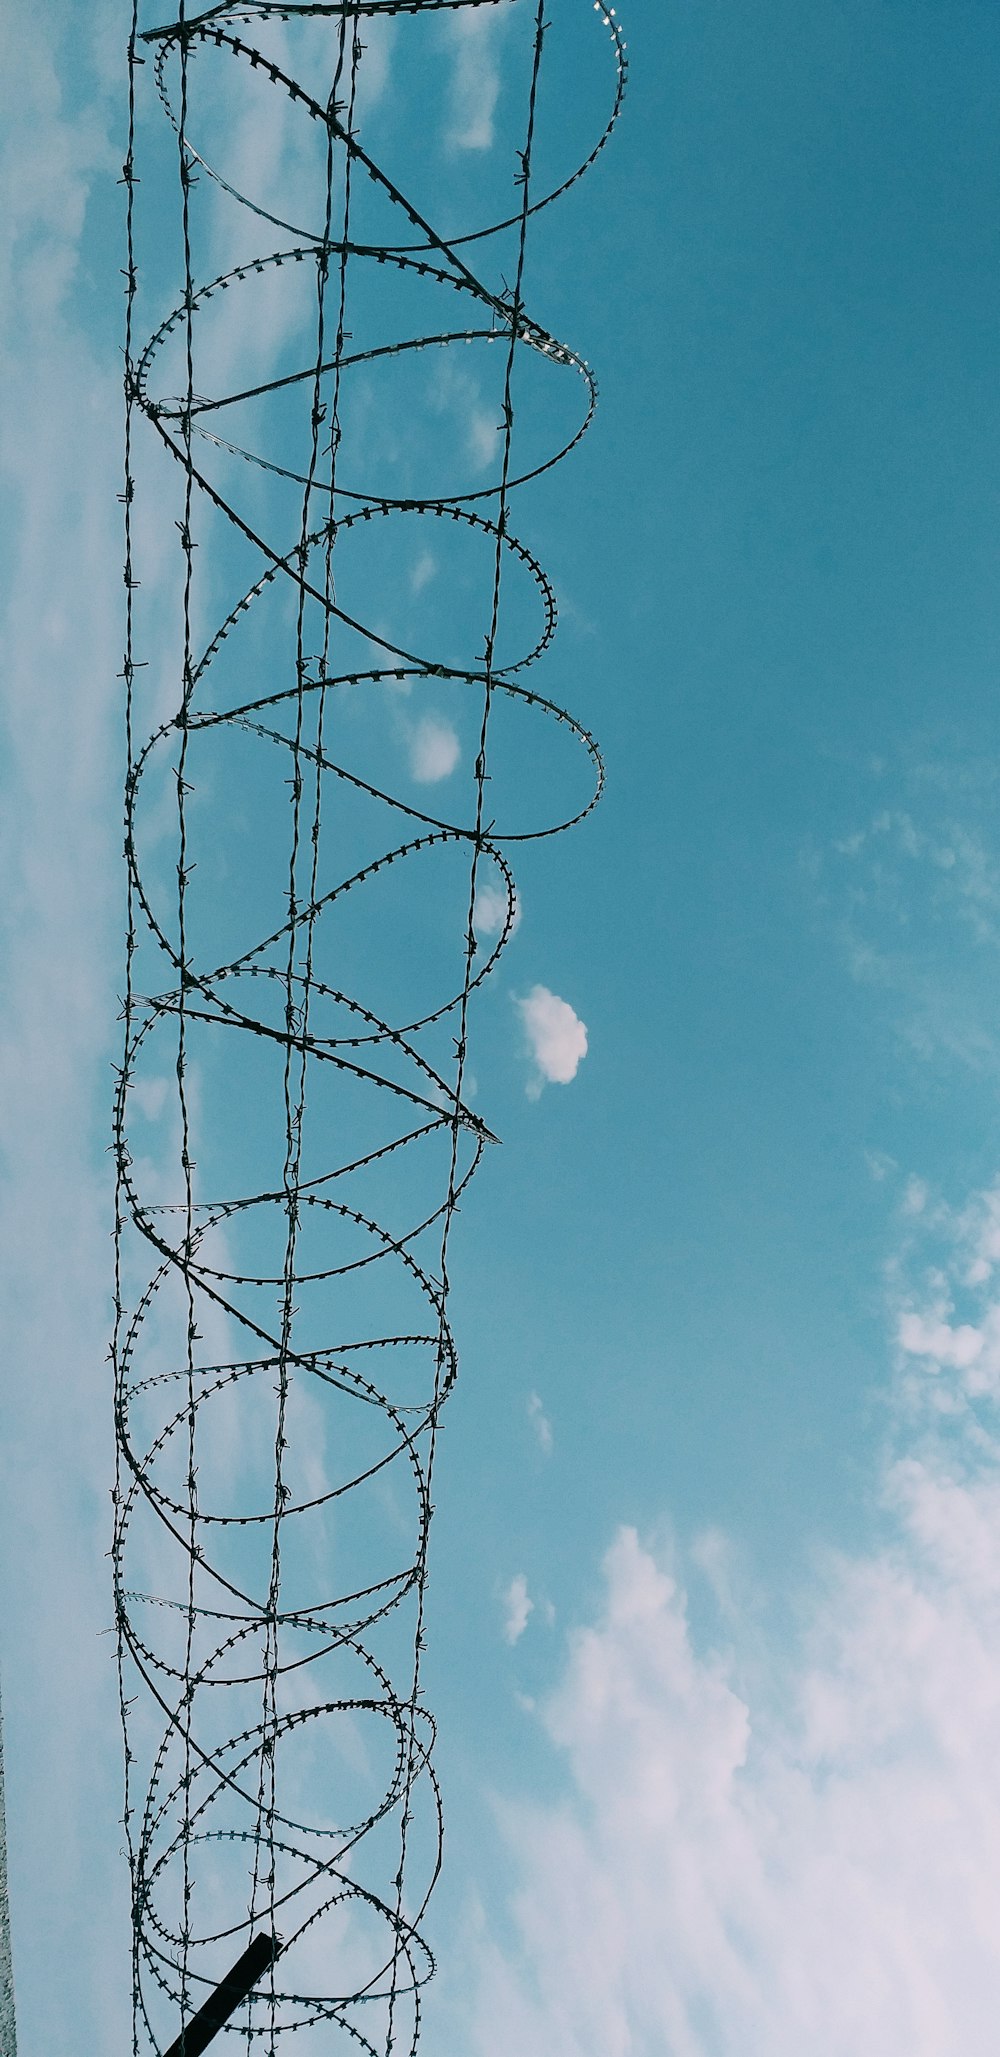 barbed wire photography